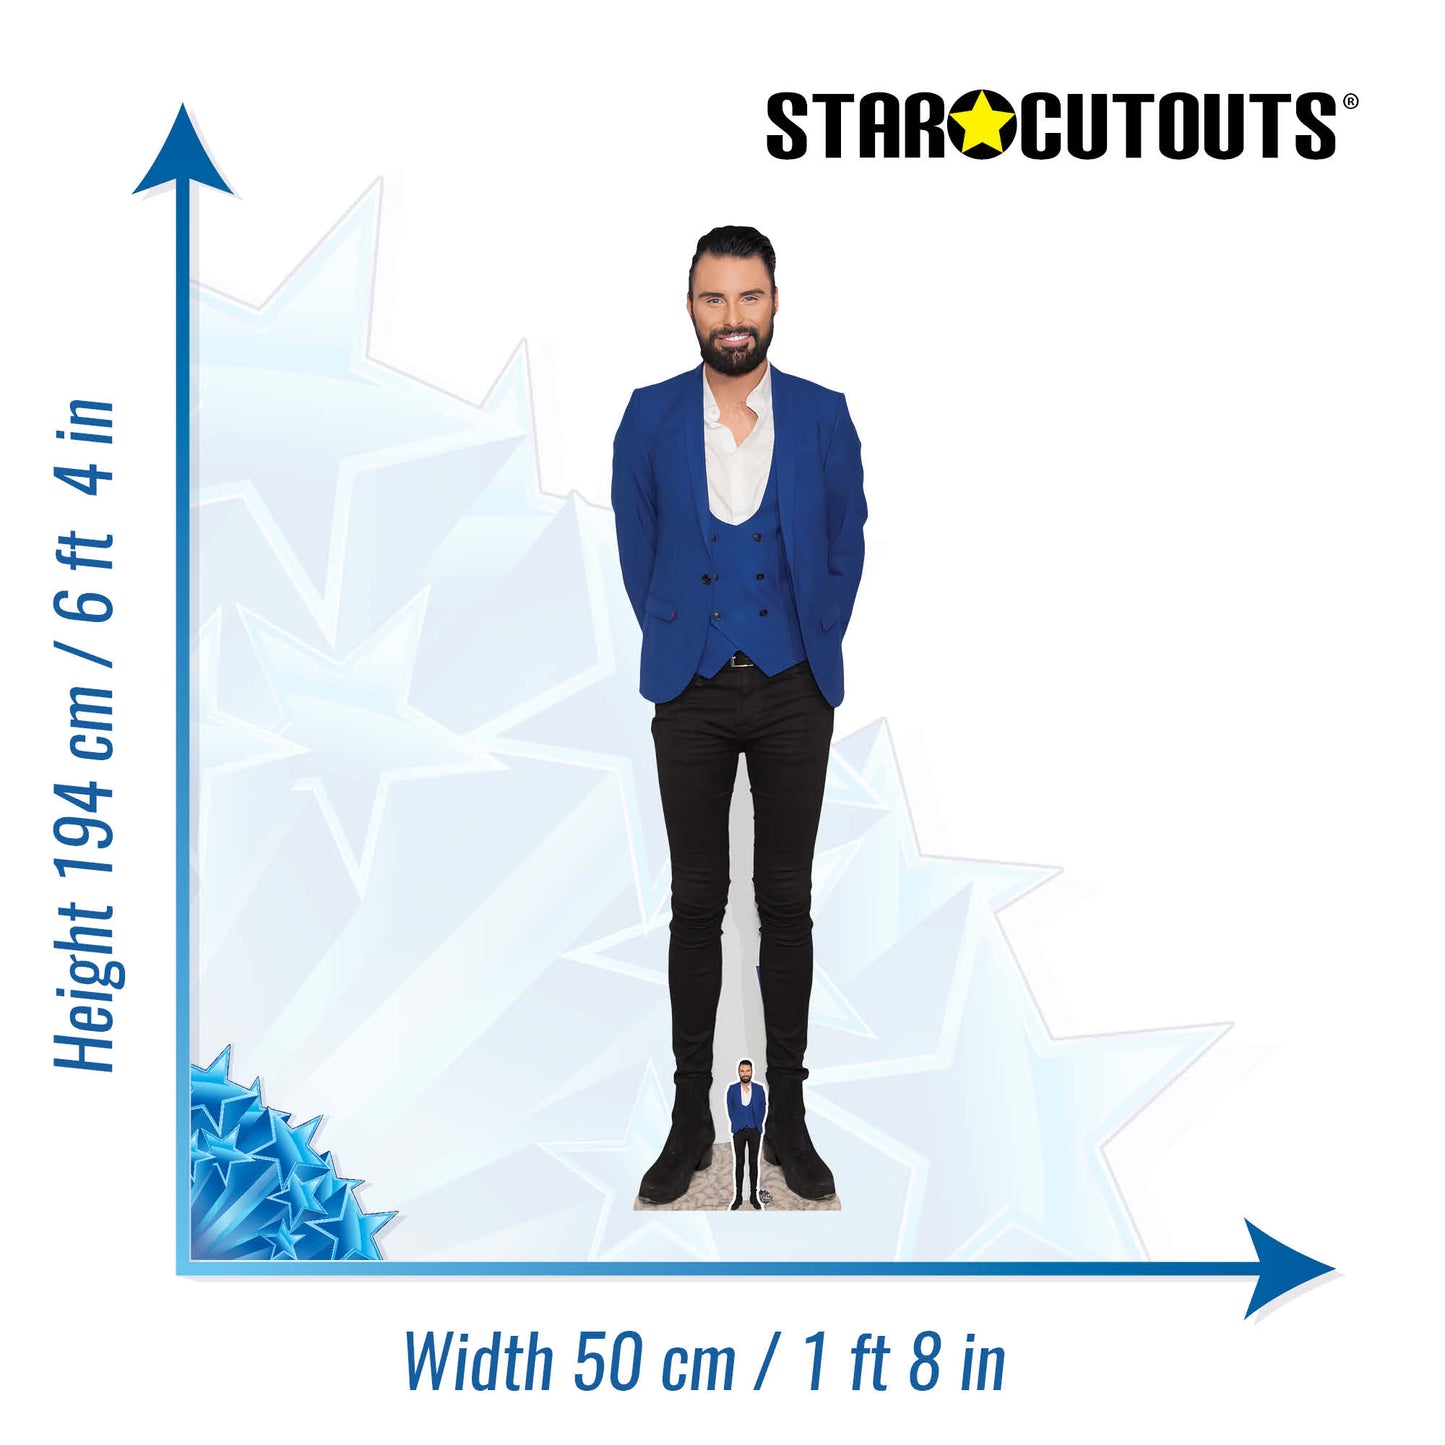 Rylan Clark Cardboard Cut Out Life Size With Mini